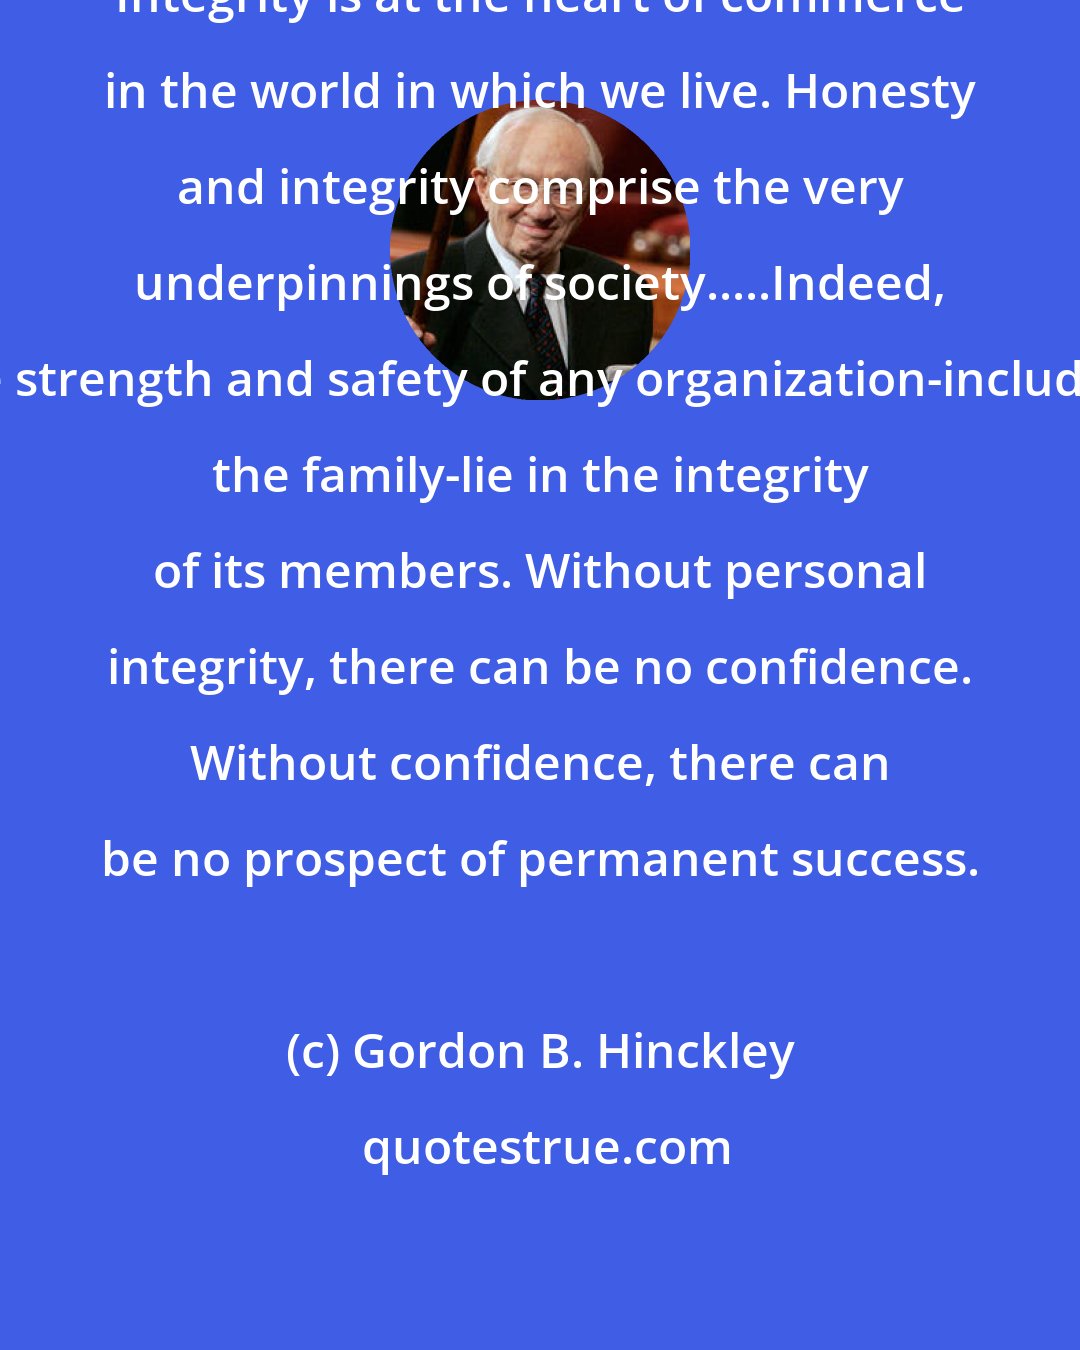 Gordon B. Hinckley: Integrity is at the heart of commerce in the world in which we live. Honesty and integrity comprise the very underpinnings of society.....Indeed, the strength and safety of any organization-including the family-lie in the integrity of its members. Without personal integrity, there can be no confidence. Without confidence, there can be no prospect of permanent success.